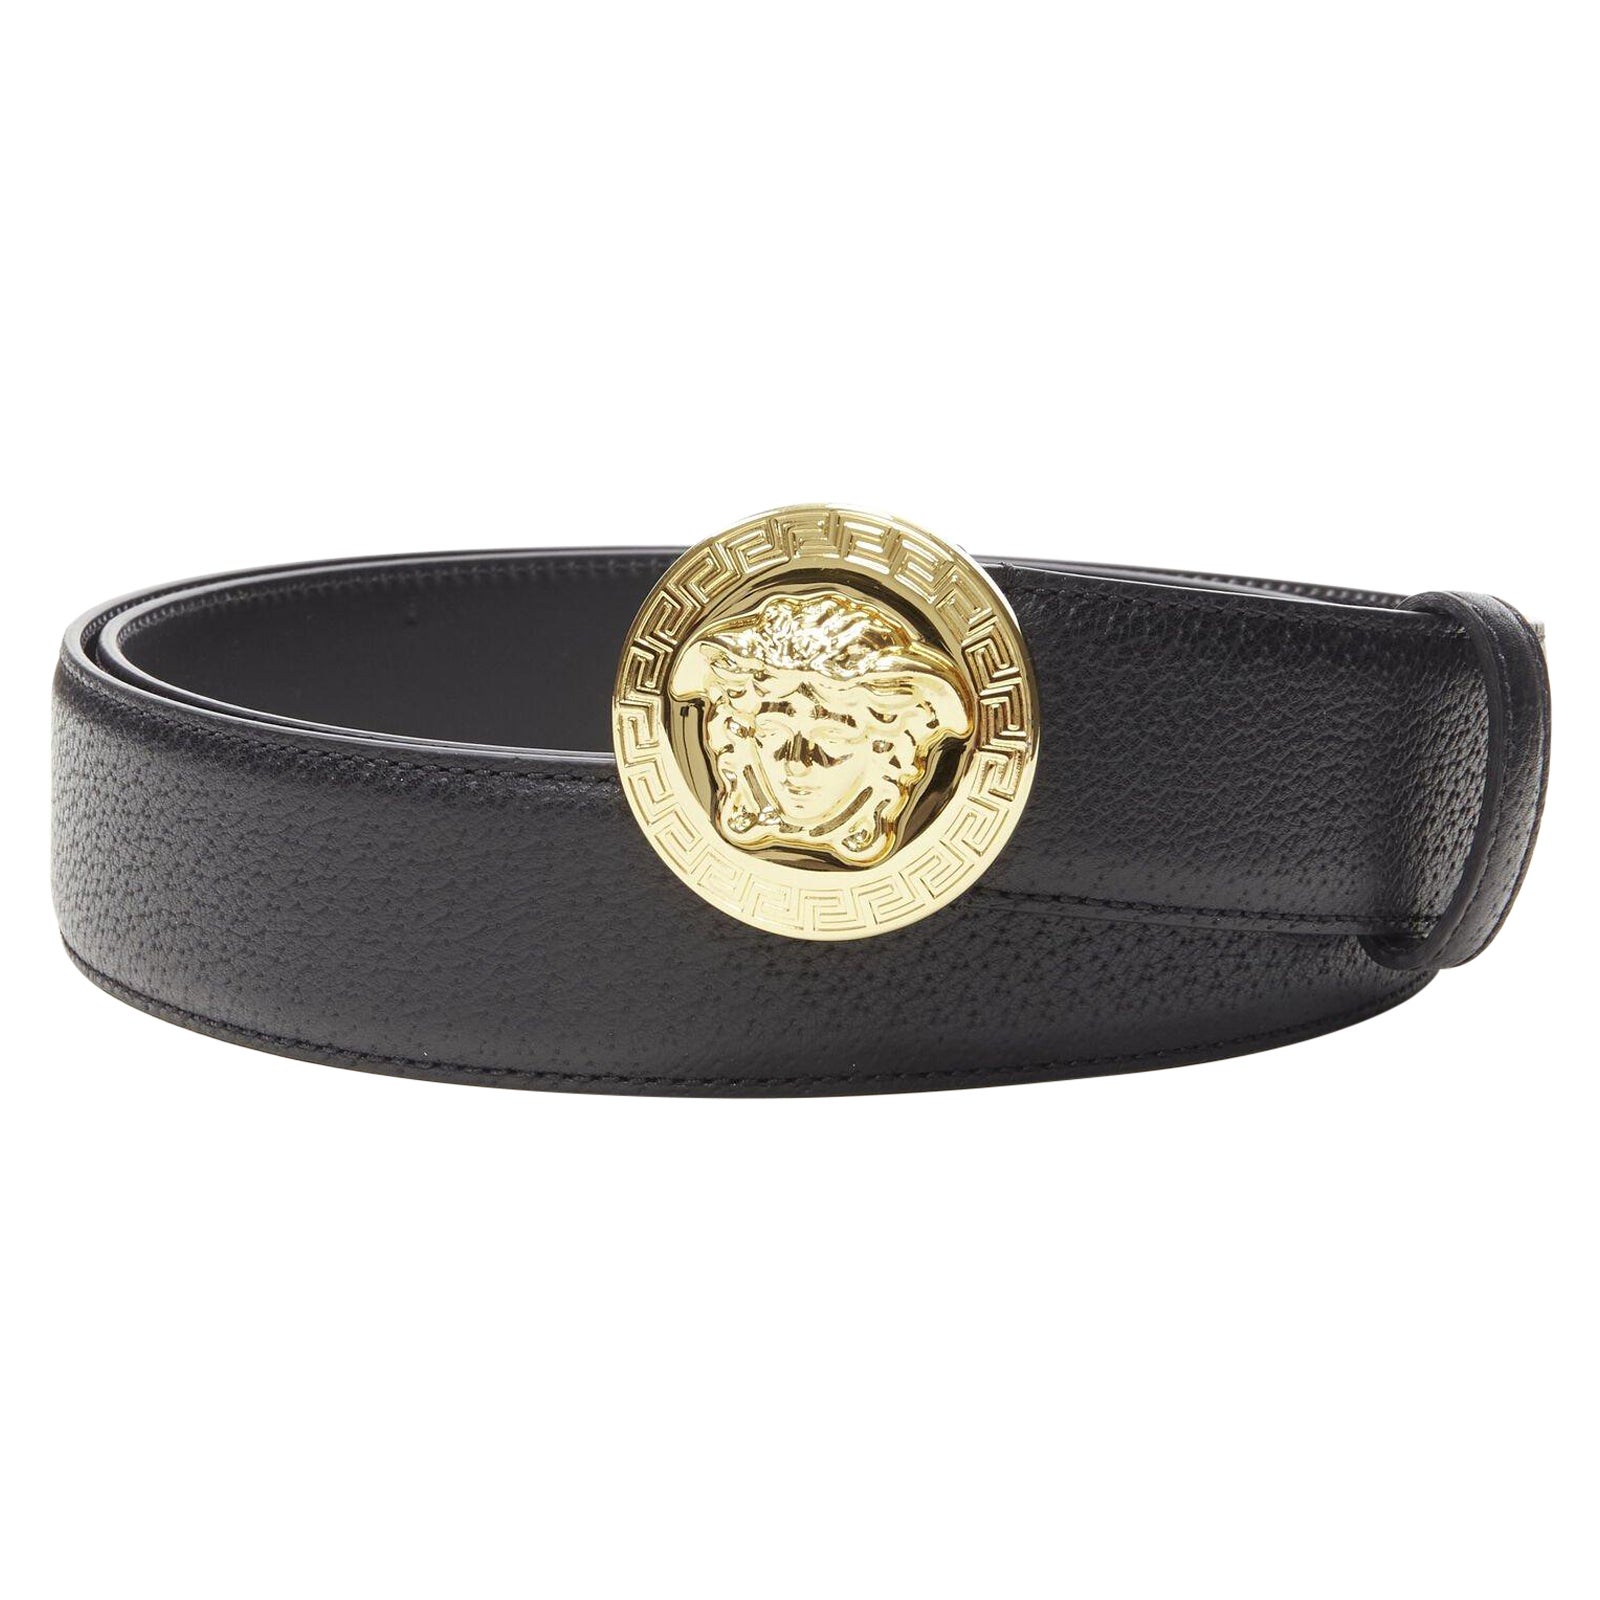 Do Versace belts have serial numbers?